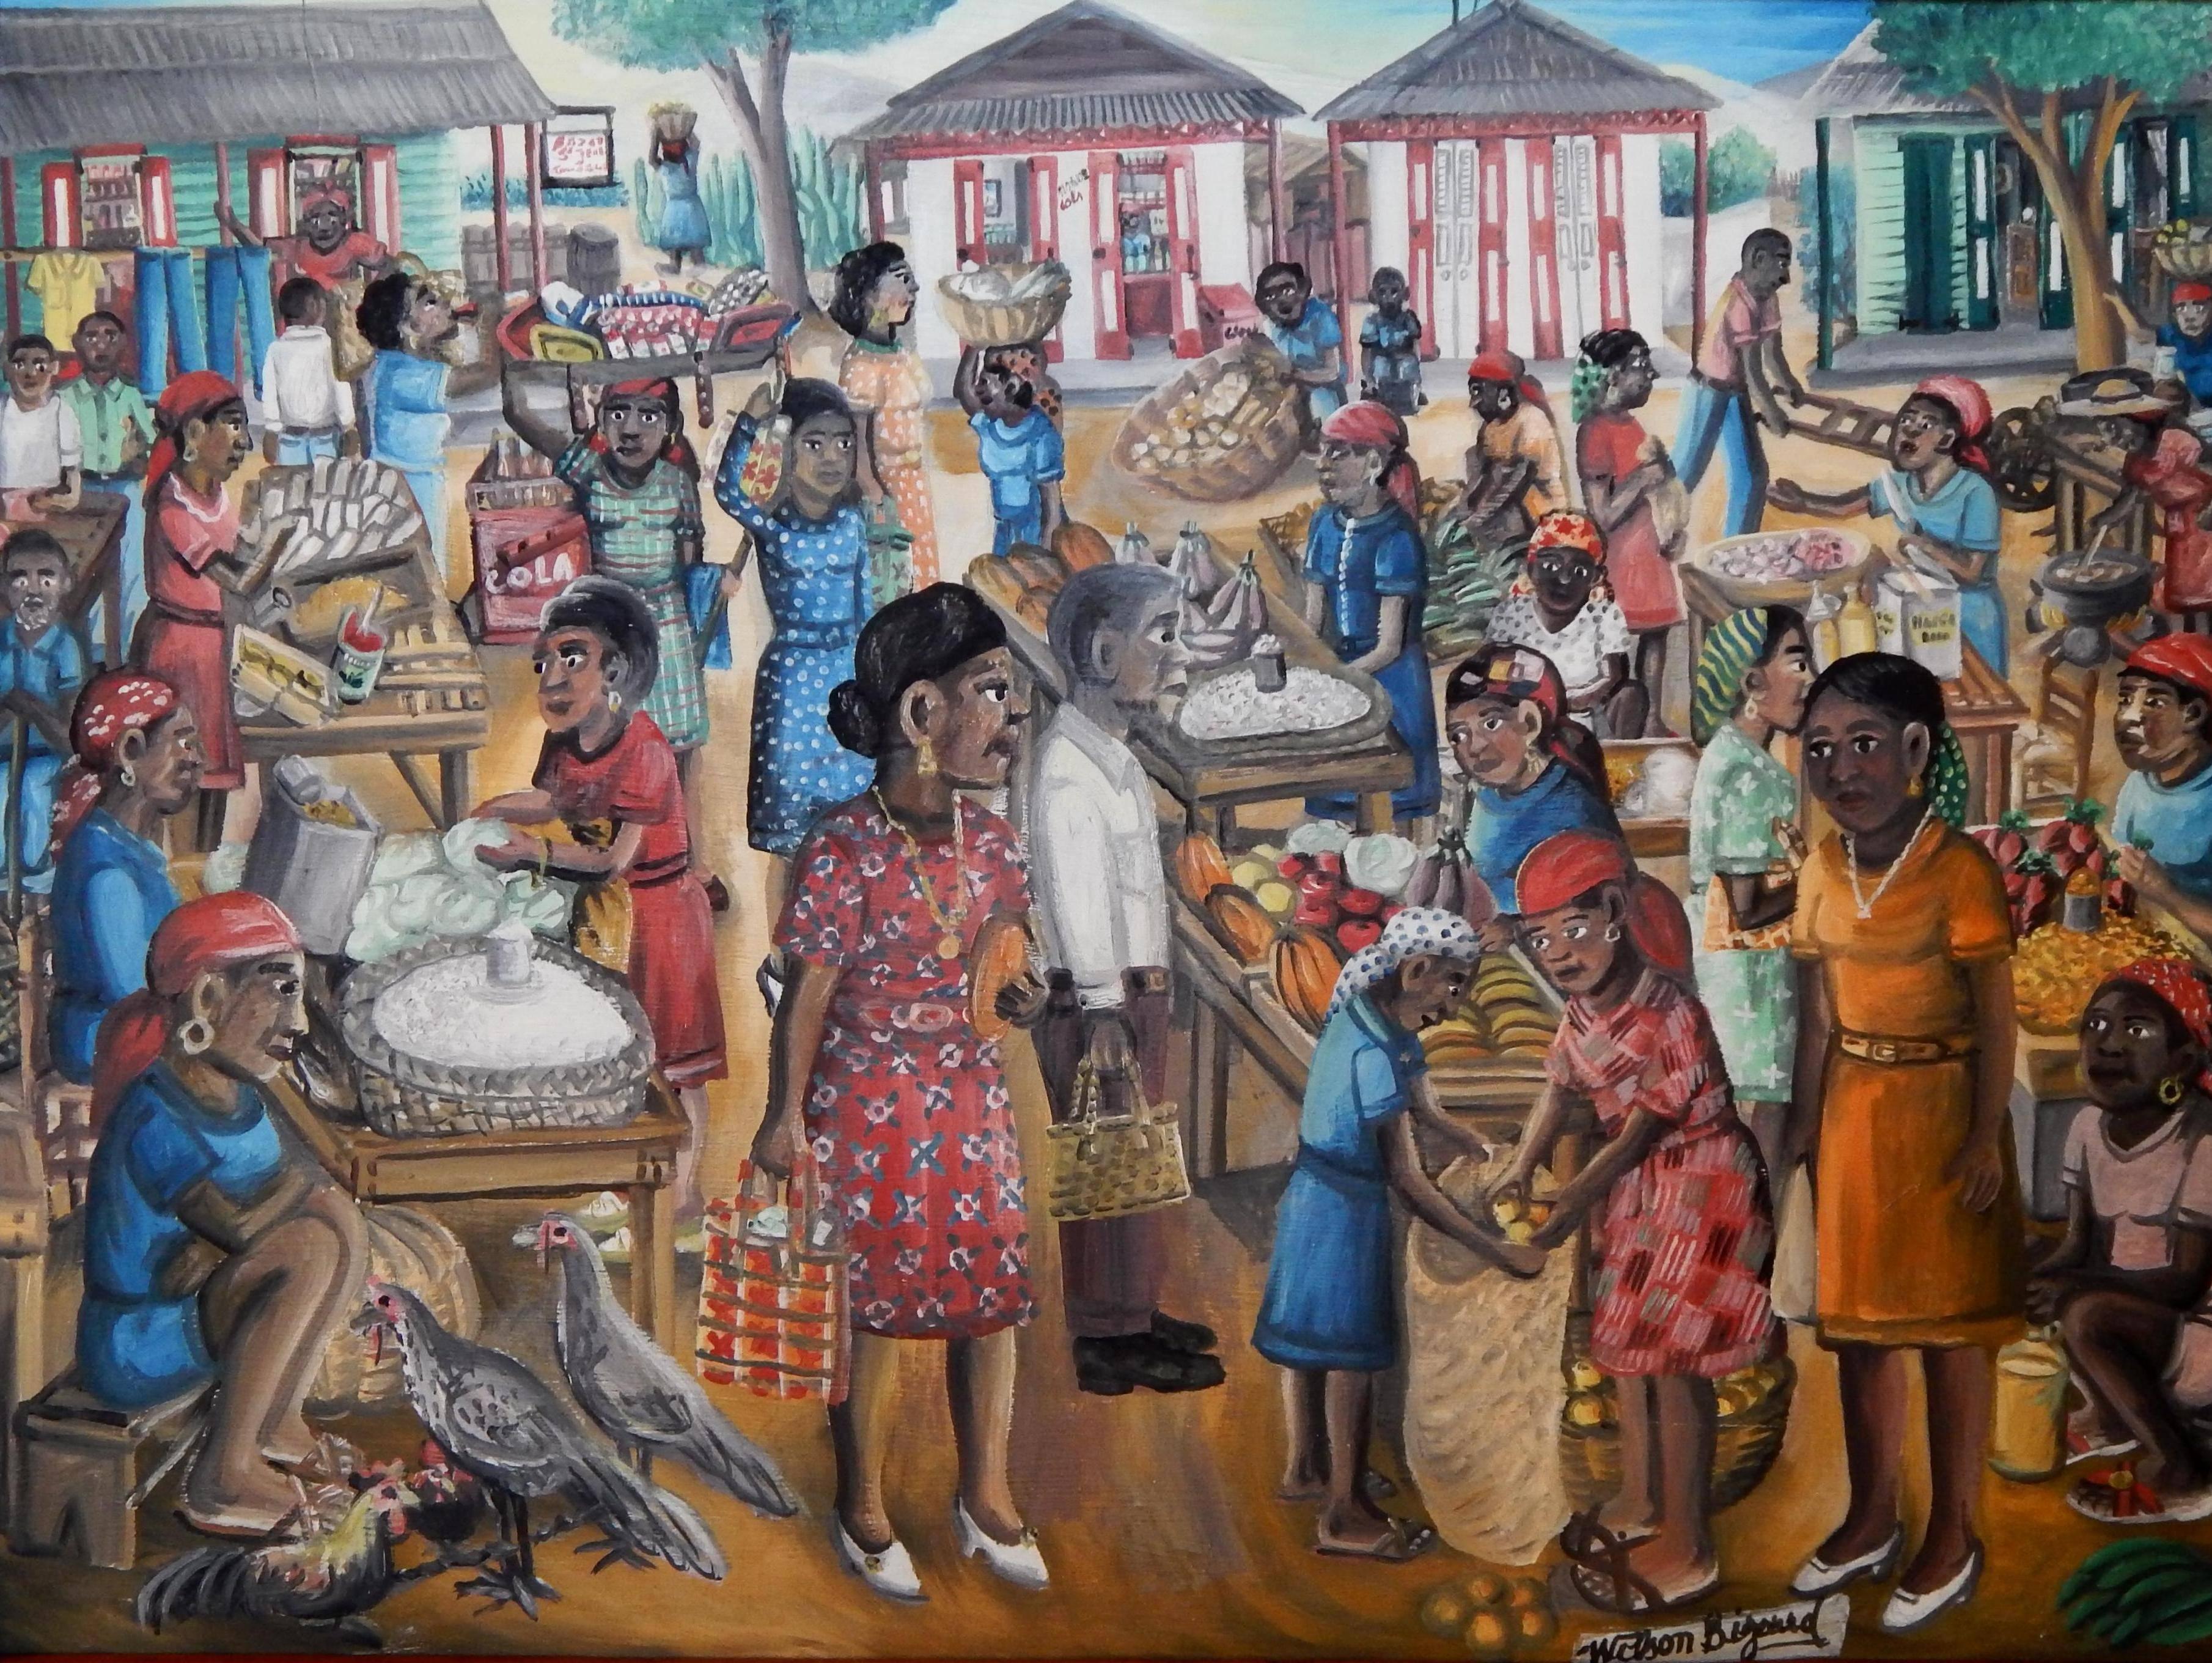 A wonderful Haitian Folk Art painting depicting a street market
by celebrated Haitian artist Wilson Bigaud (1931-2010).
Oil on board measuring 24 x 32.
Excellent condition.

Wilson Bigaud was born in Port-au-Prince, Haiti. At age 18, he met